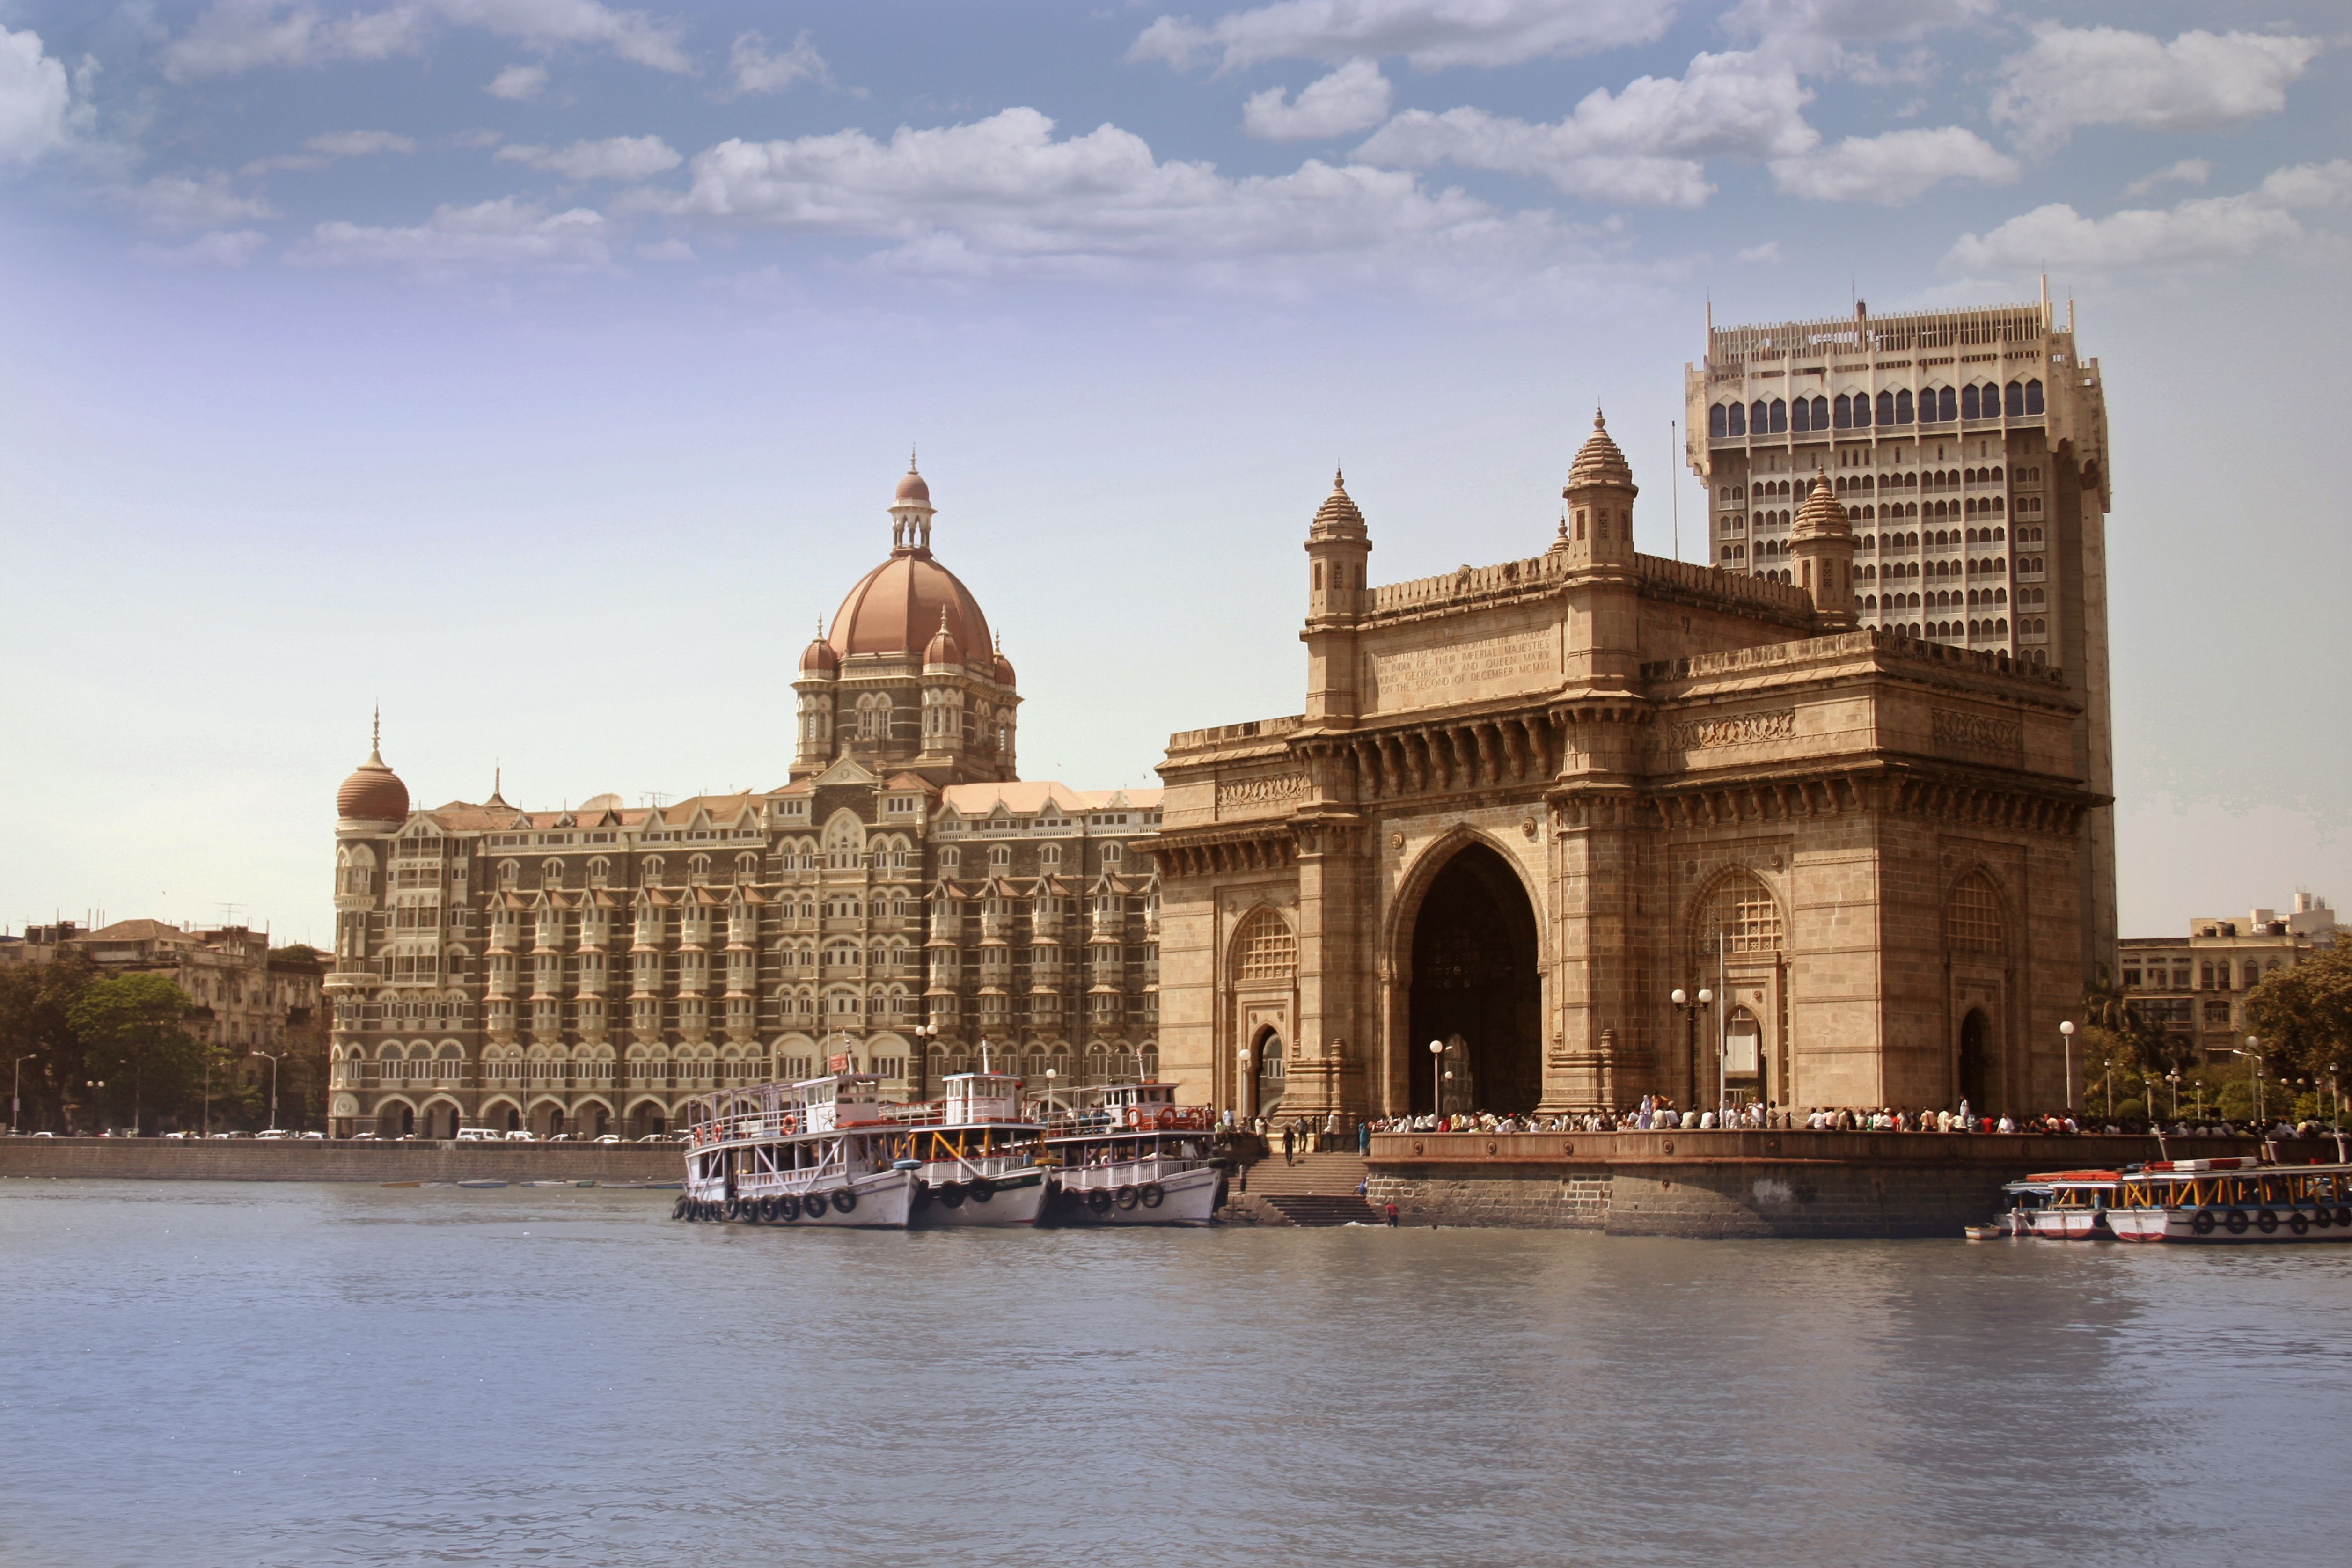 View of Gateway of India from the water